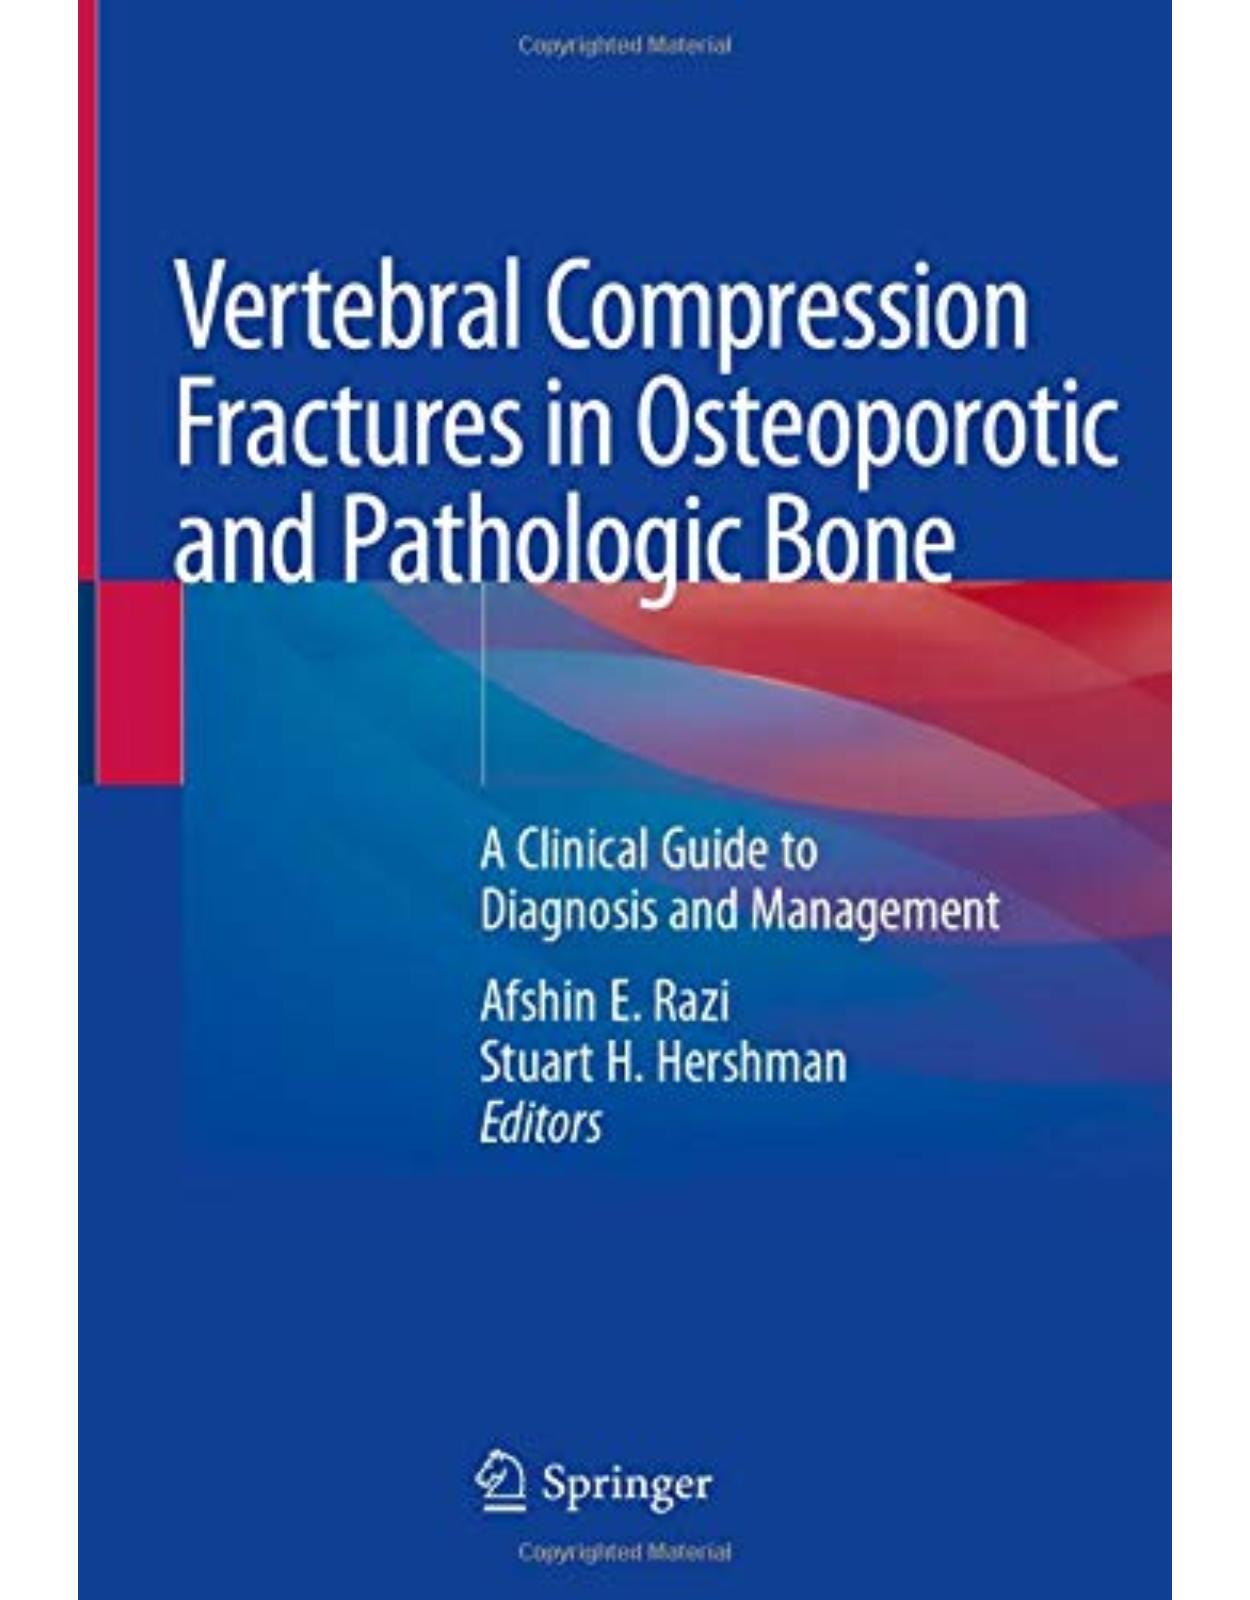 Spinal Compression Fractures in Osteoporotic and Pathologic Bone: A Clinical Guide to Diagnosis and Management